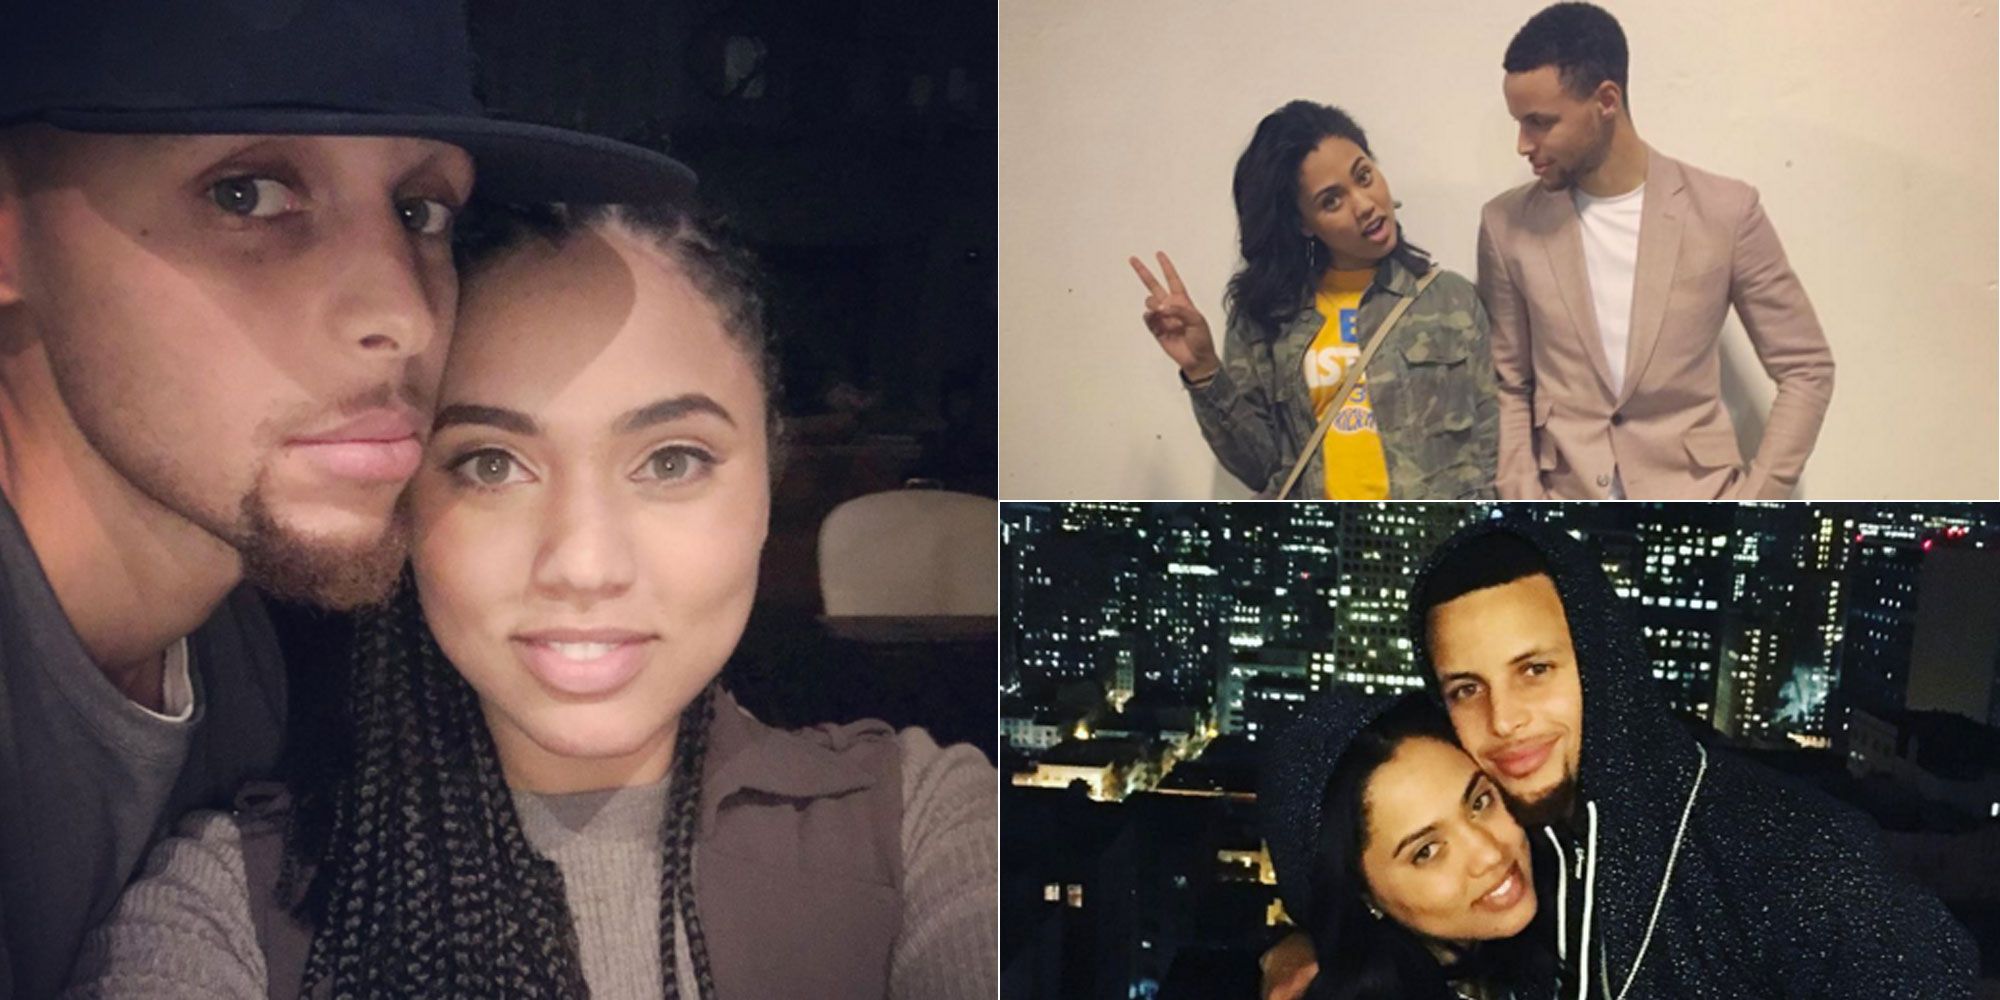 In a viral clip, Stephen Curry and Ayesha Curry indulge in a